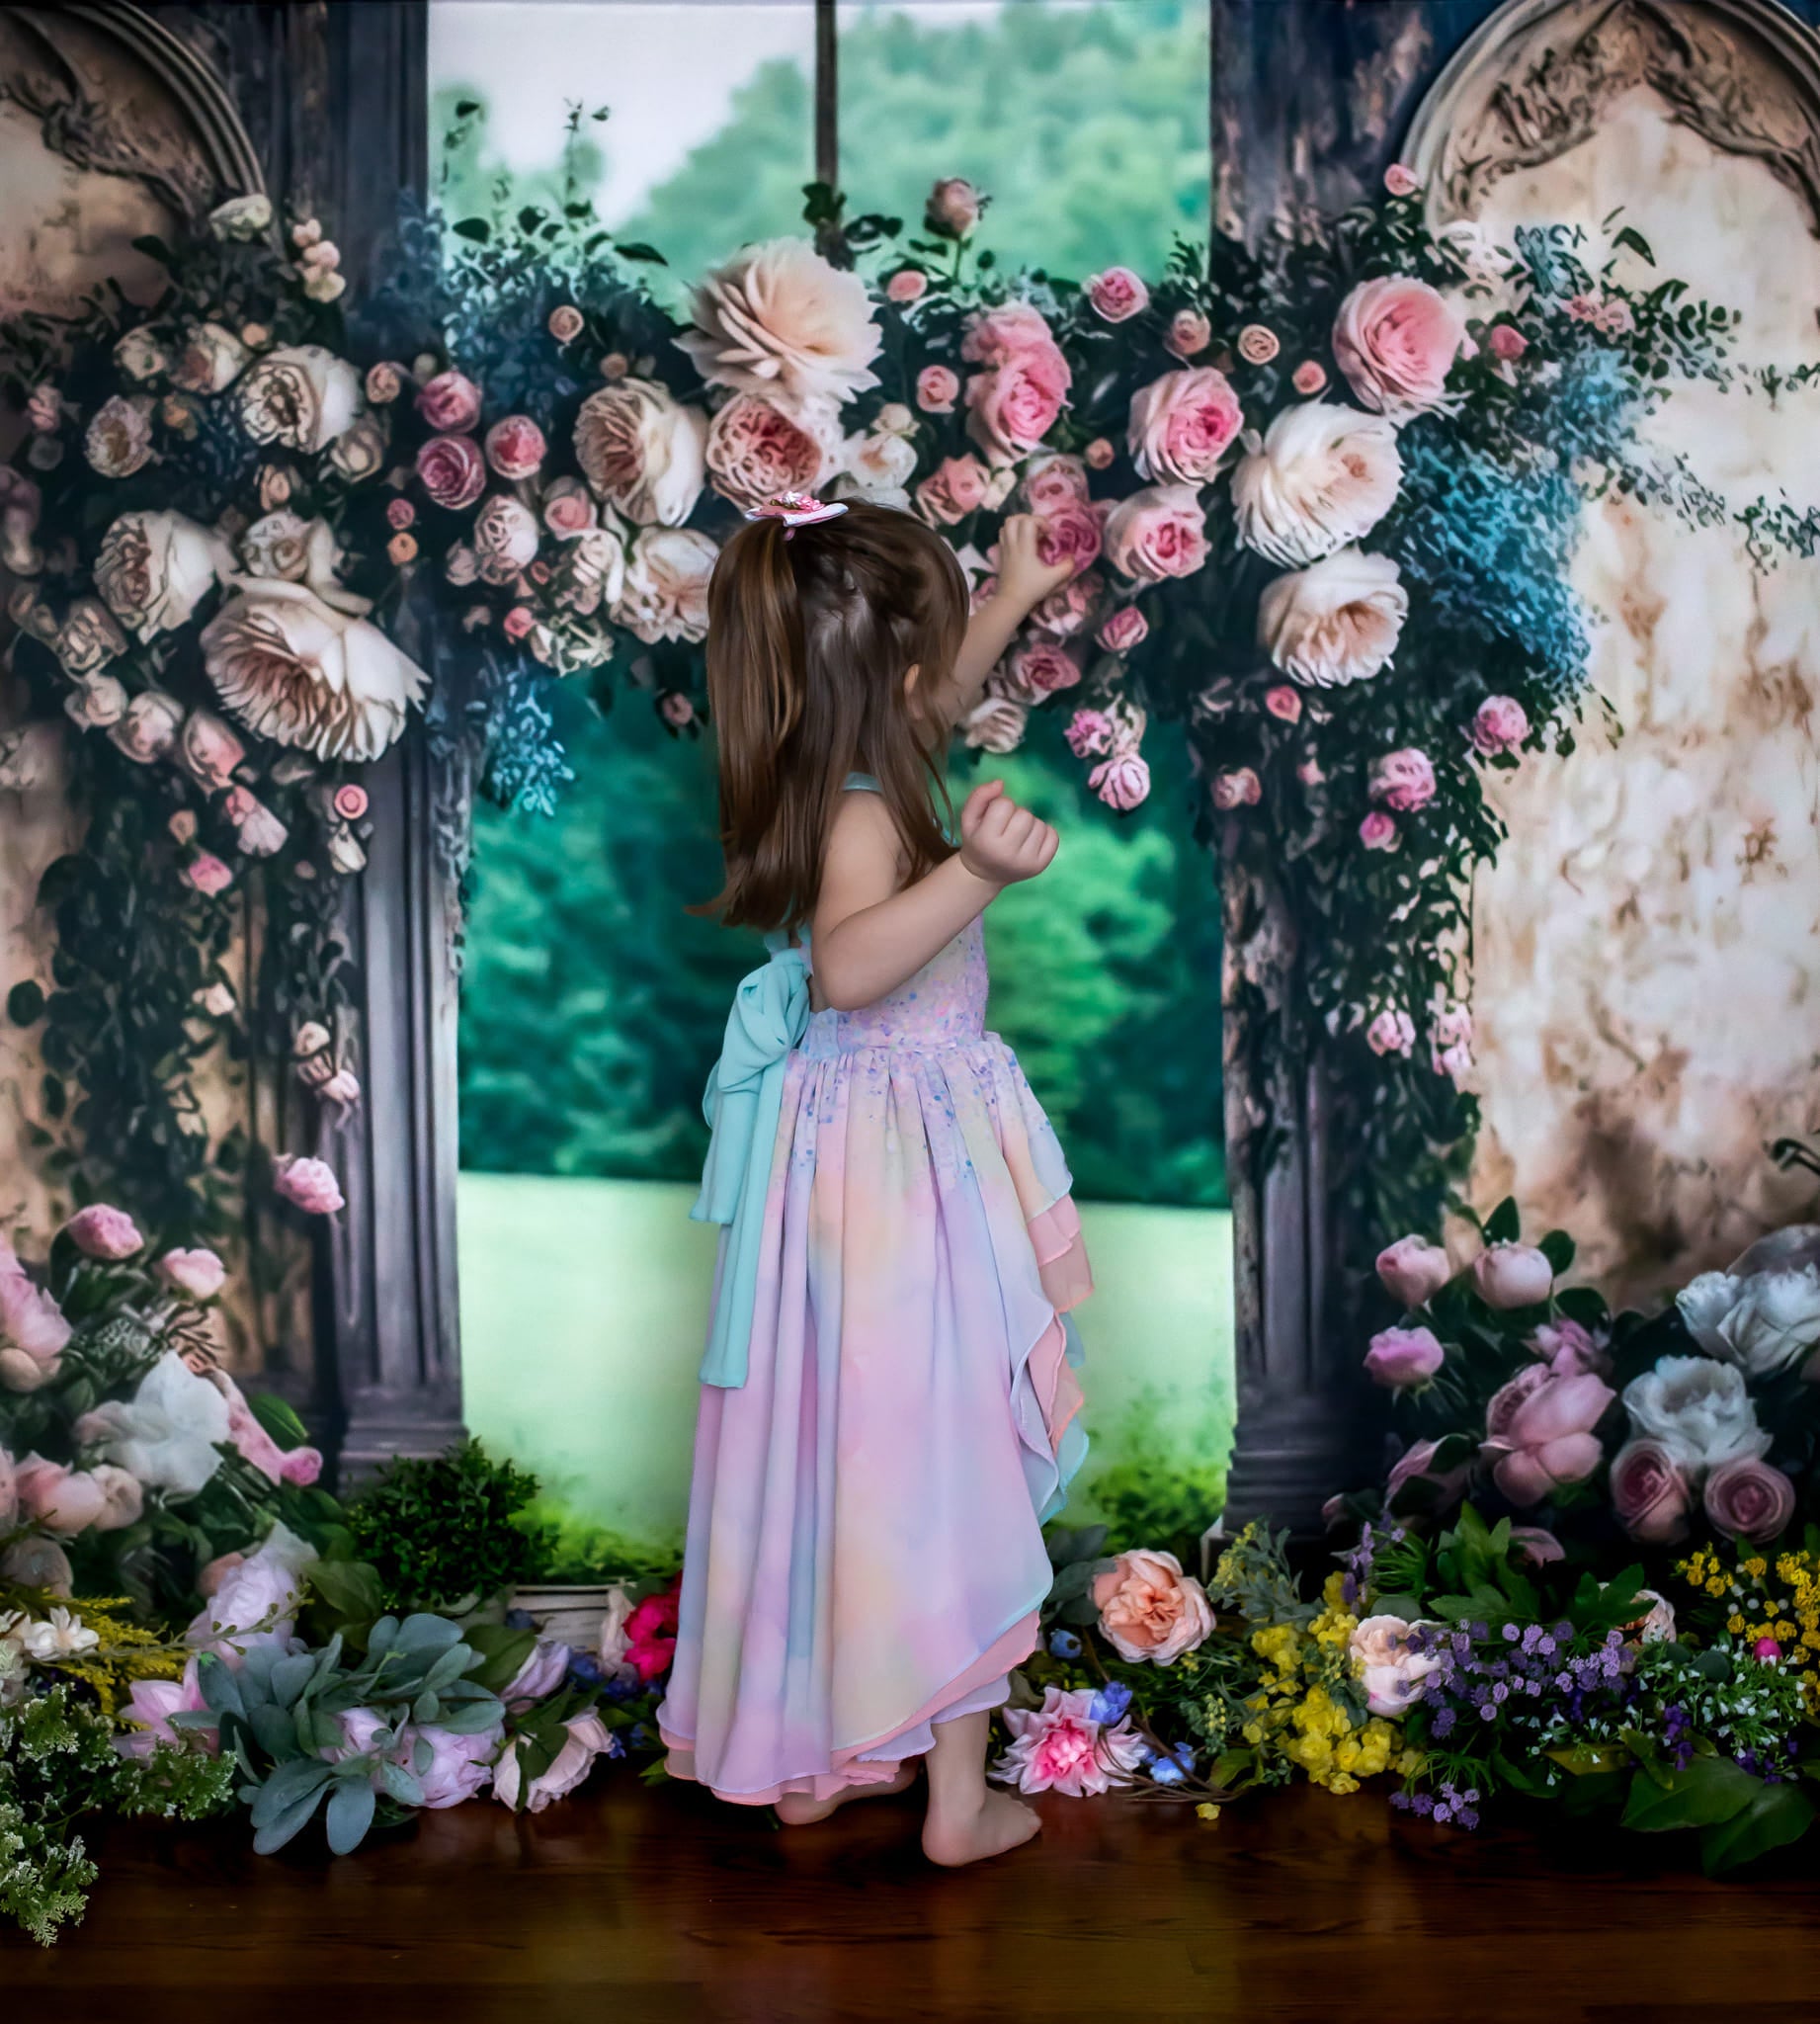 Kate Pink Rose Floral Backdrop Outside Wedding Wall Designed by Mini MakeBelieve